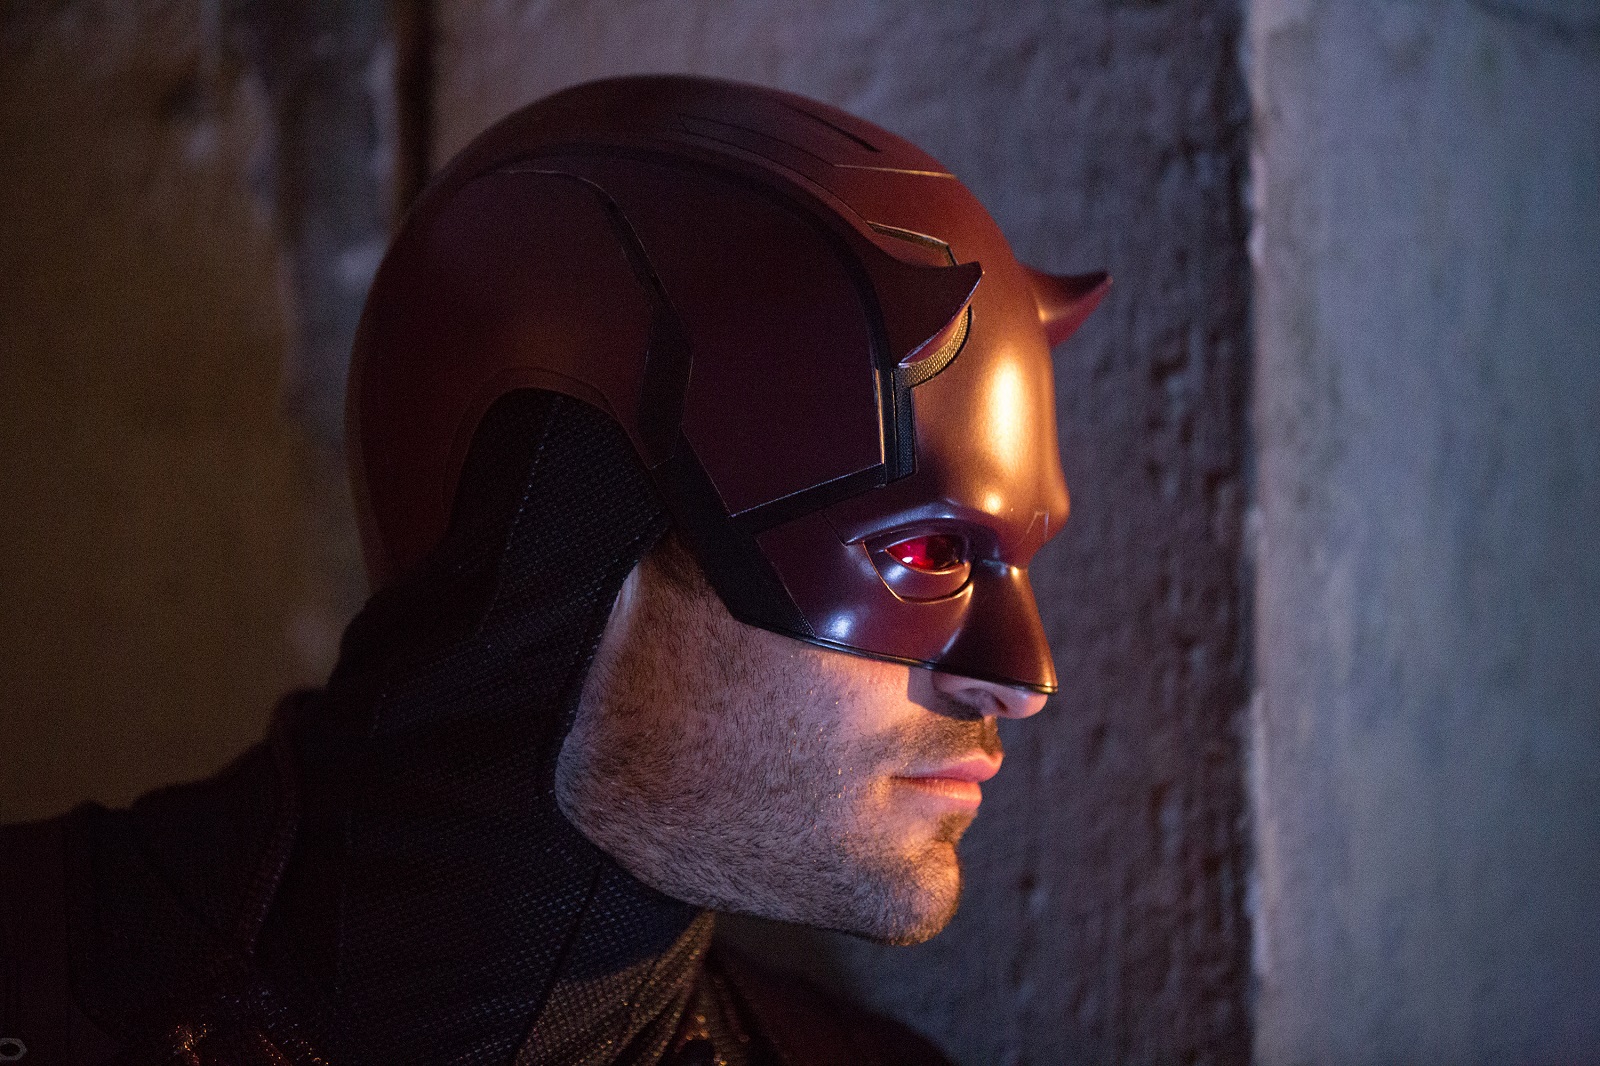 Daredevil is in No Way Home, and Charlie Cox can finally talk about it